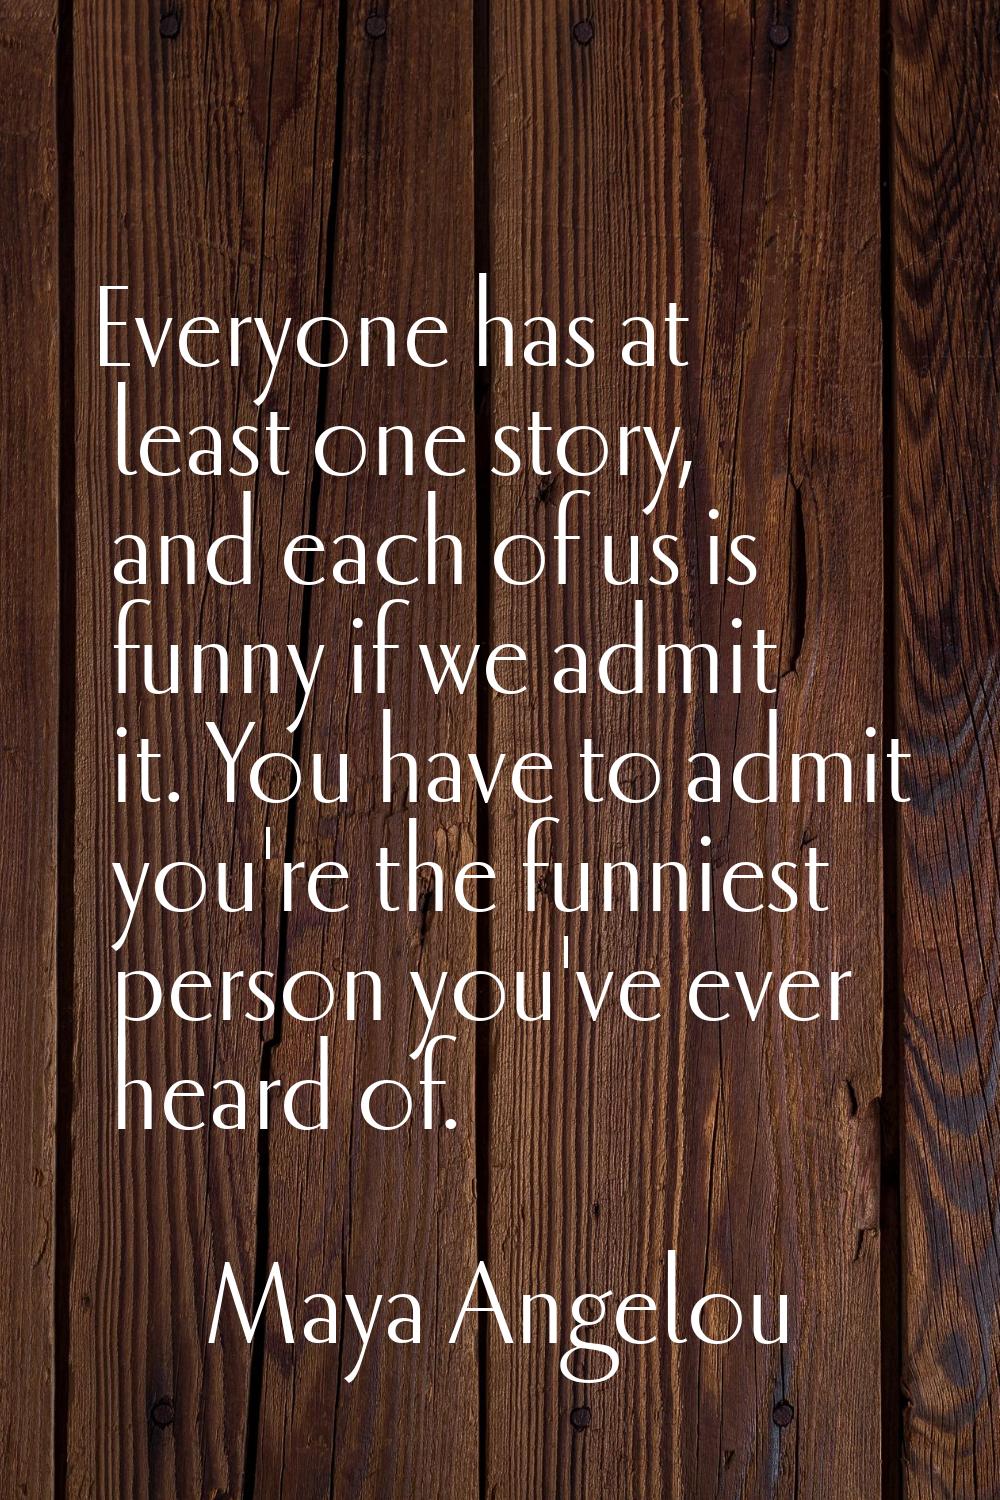 Everyone has at least one story, and each of us is funny if we admit it. You have to admit you're t